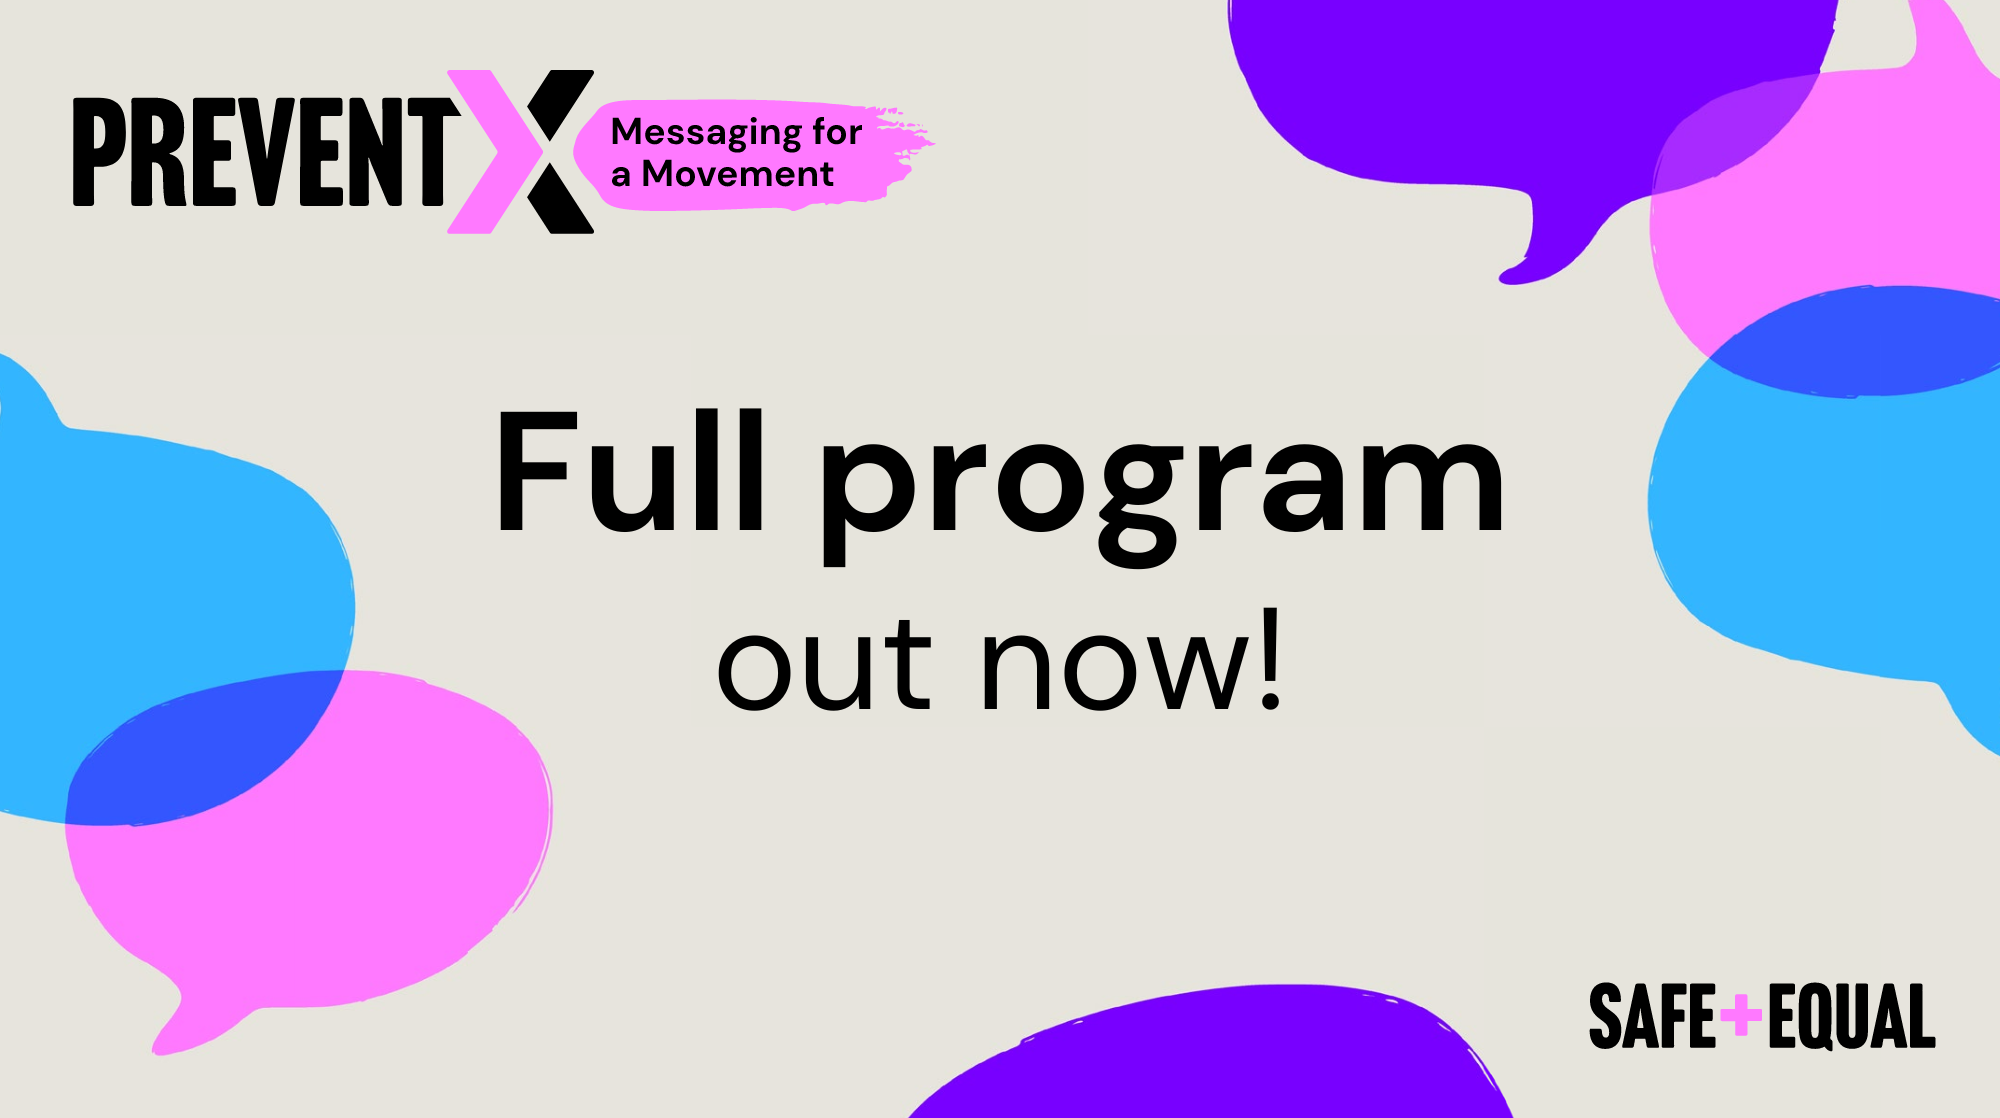 PreventX: Messaging for a Movement full program out now!